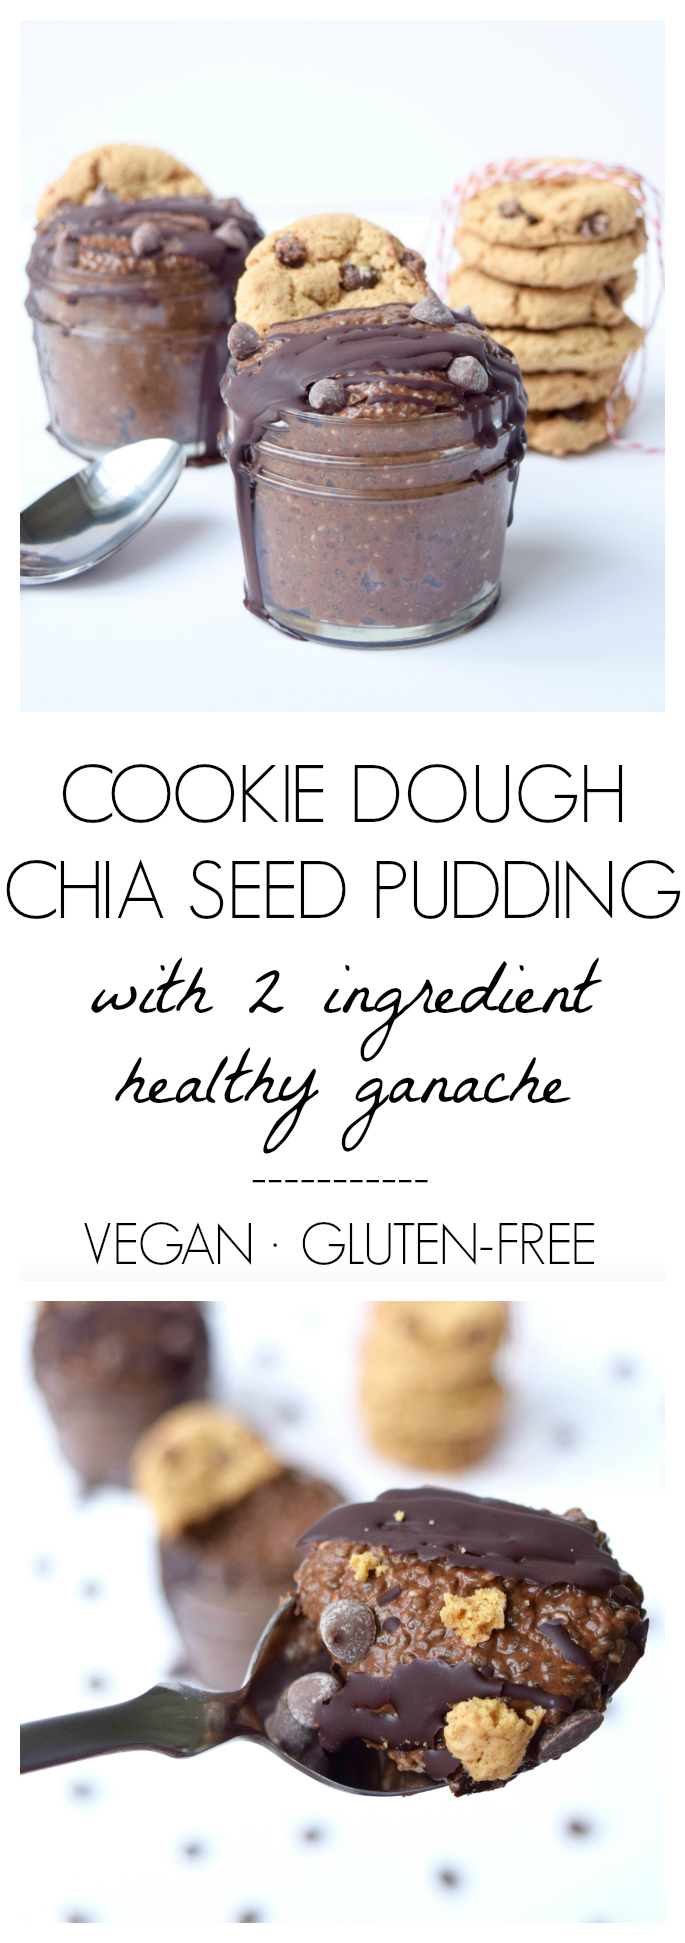 COOKIE DOUGH CHIA SEED PUDDING WITH 2 INGREDIENT HEALTHY GANACHE